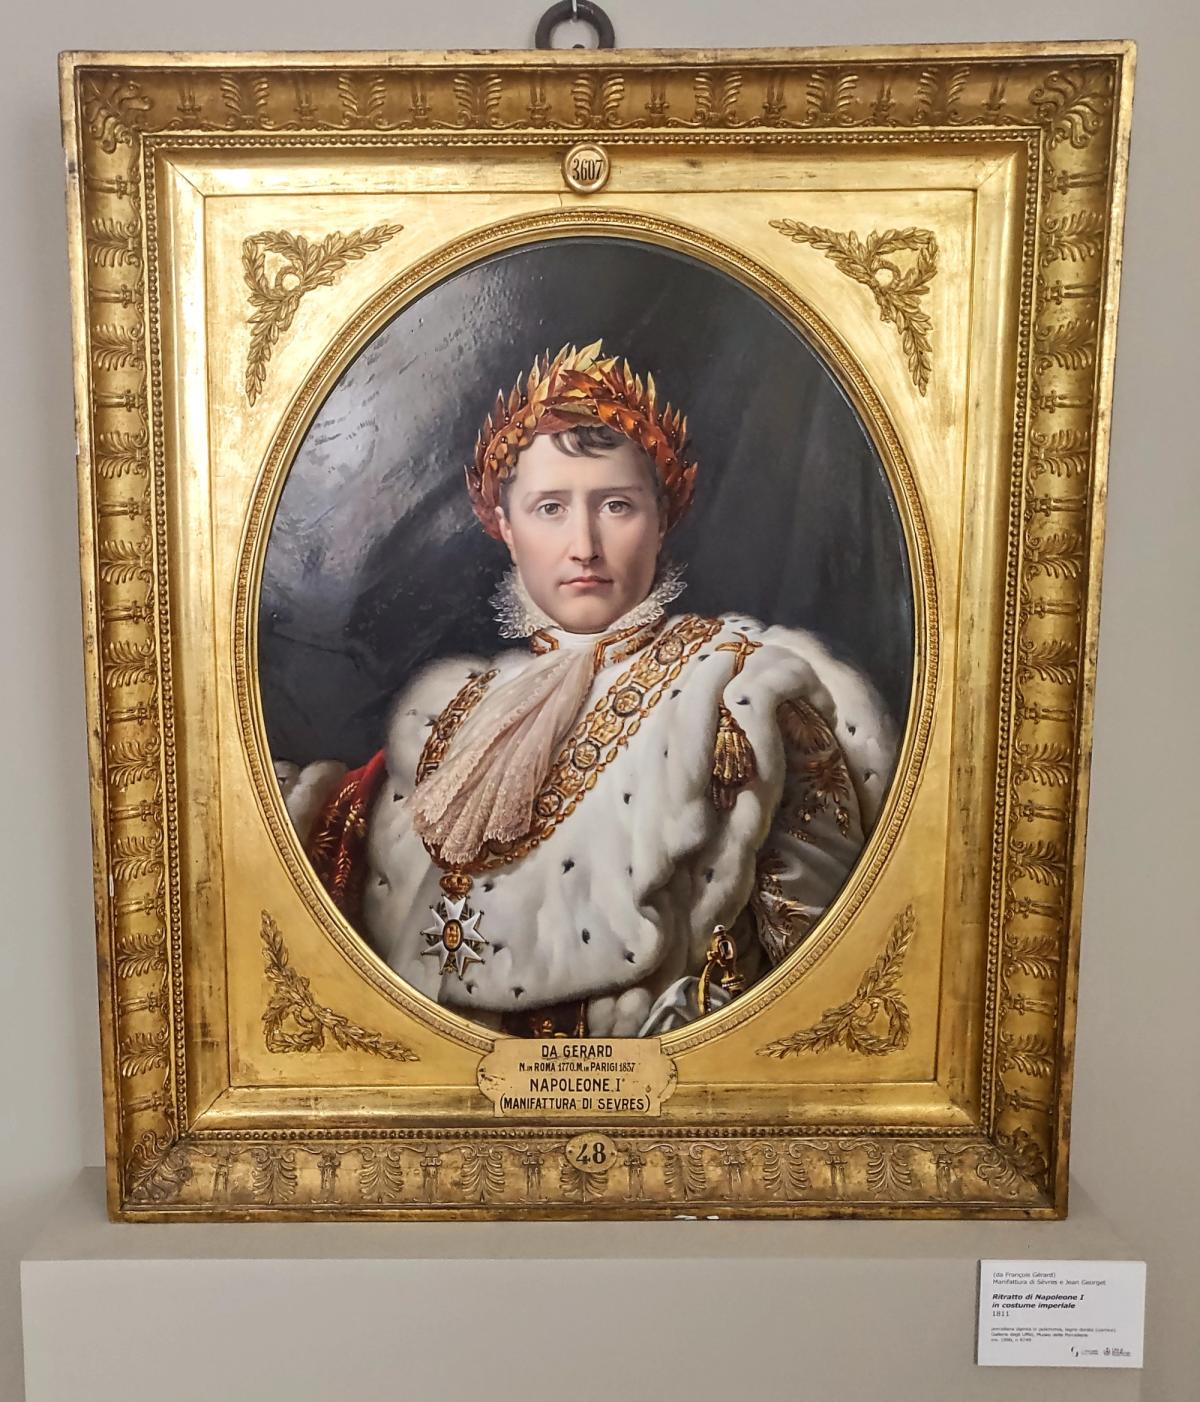 A portrait of Napoleon I painted by Jean Georget on a large porcelain tile, which created at the Sèvres manufactory in 1810 